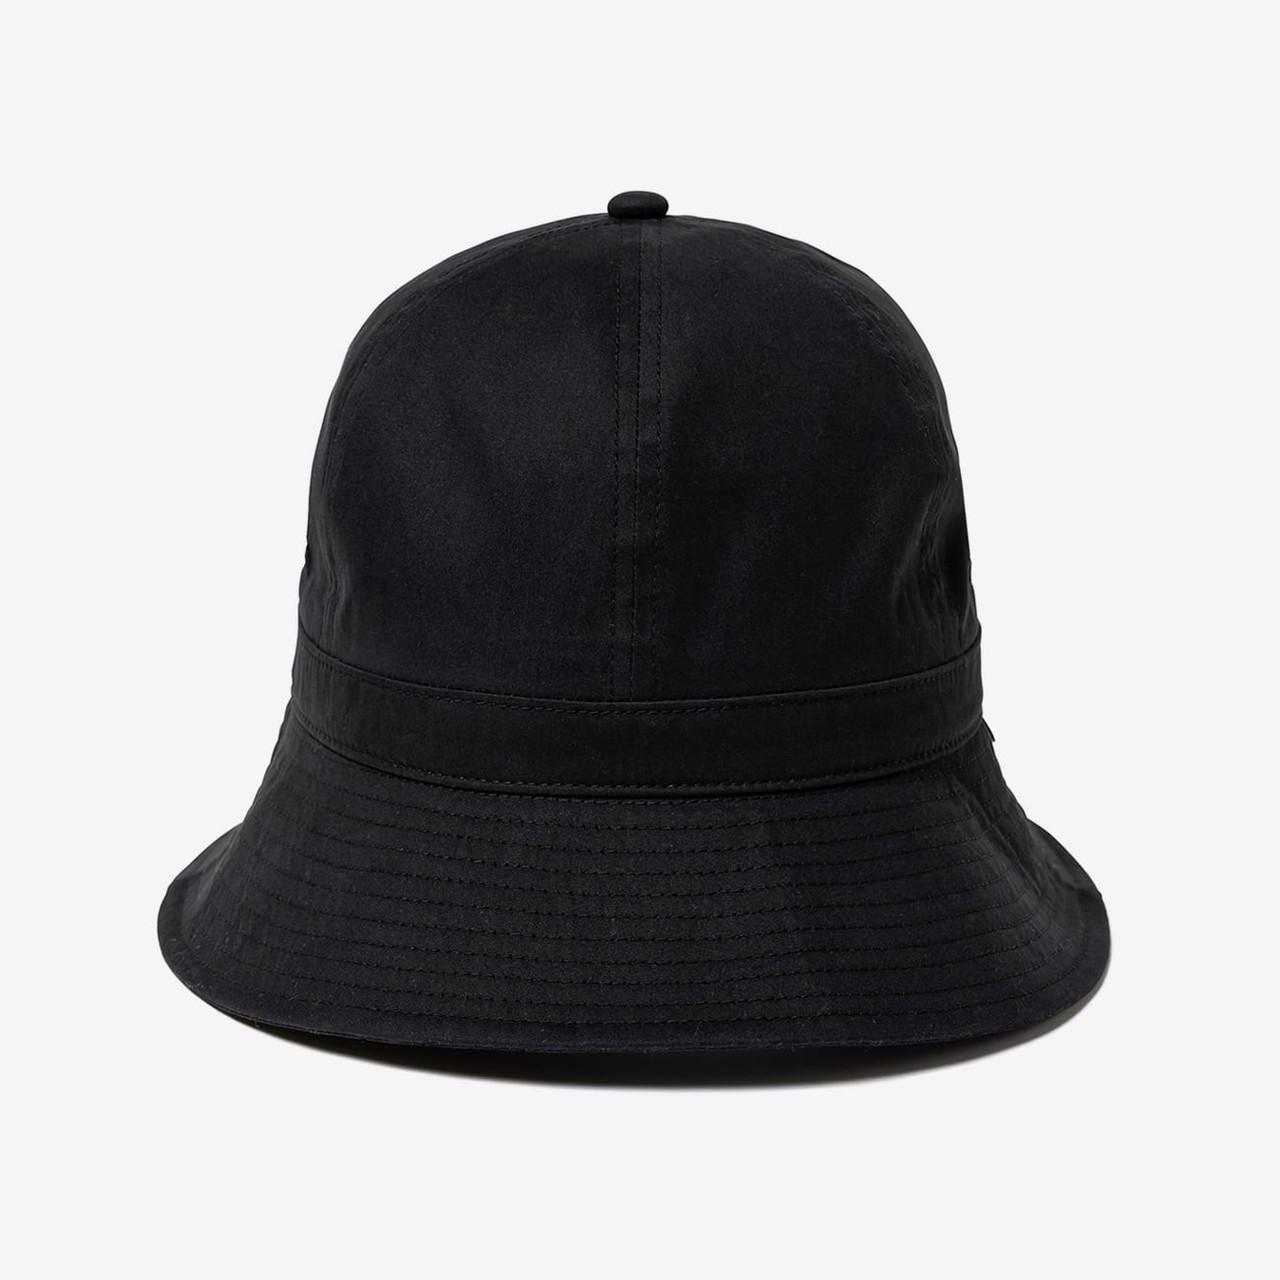 WTAPS Hat.Cap BALL / HAT / NYCO. OXFORD